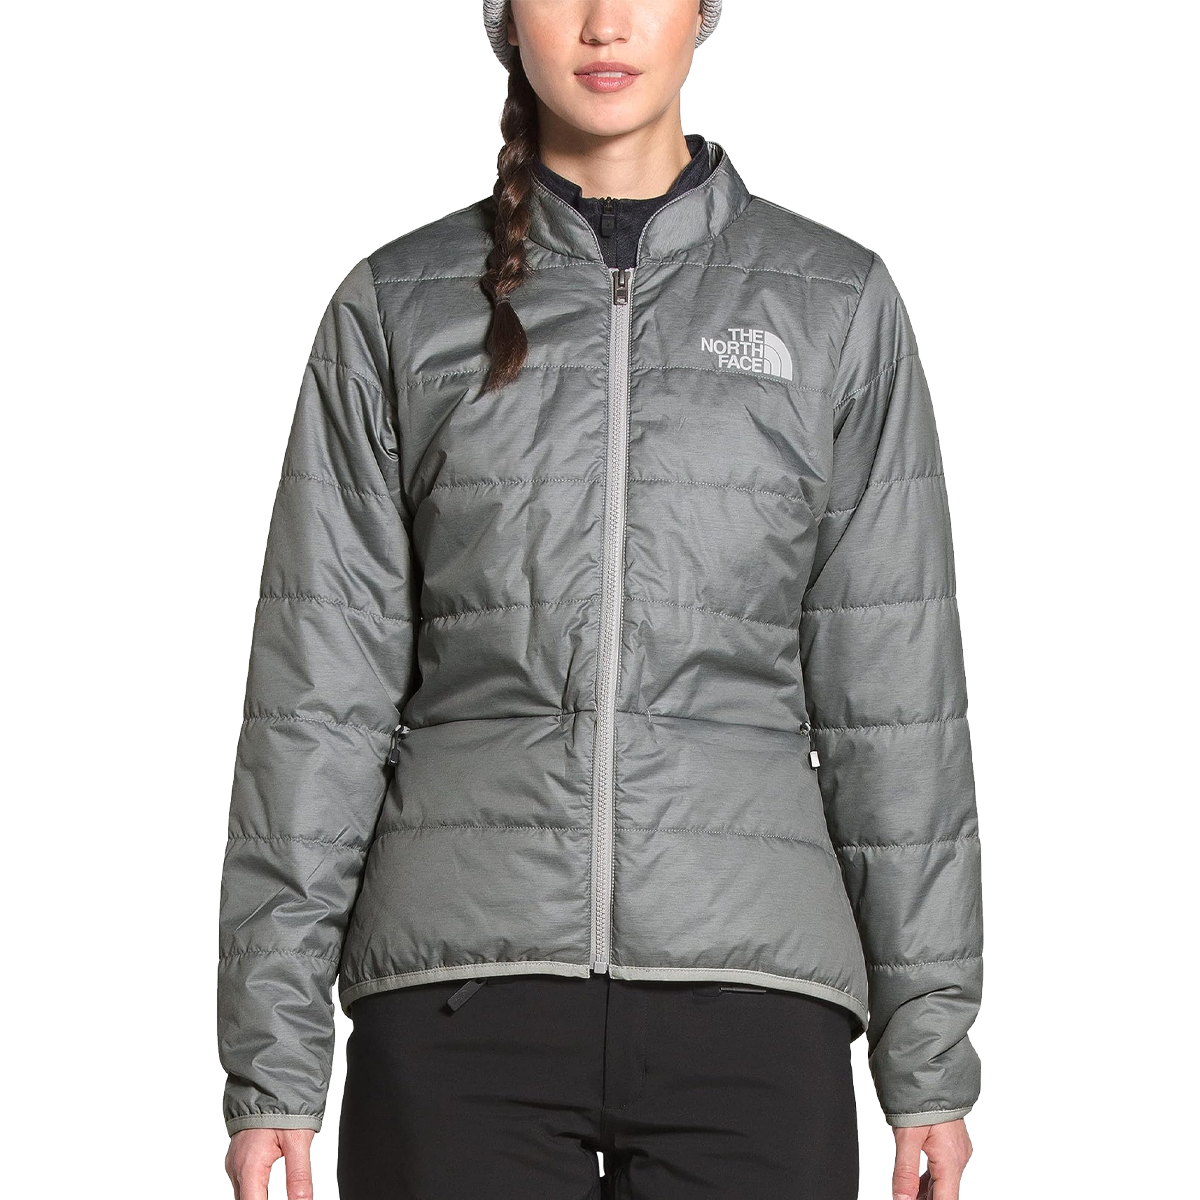 Women's Clementine Triclimate Jacket alternate view